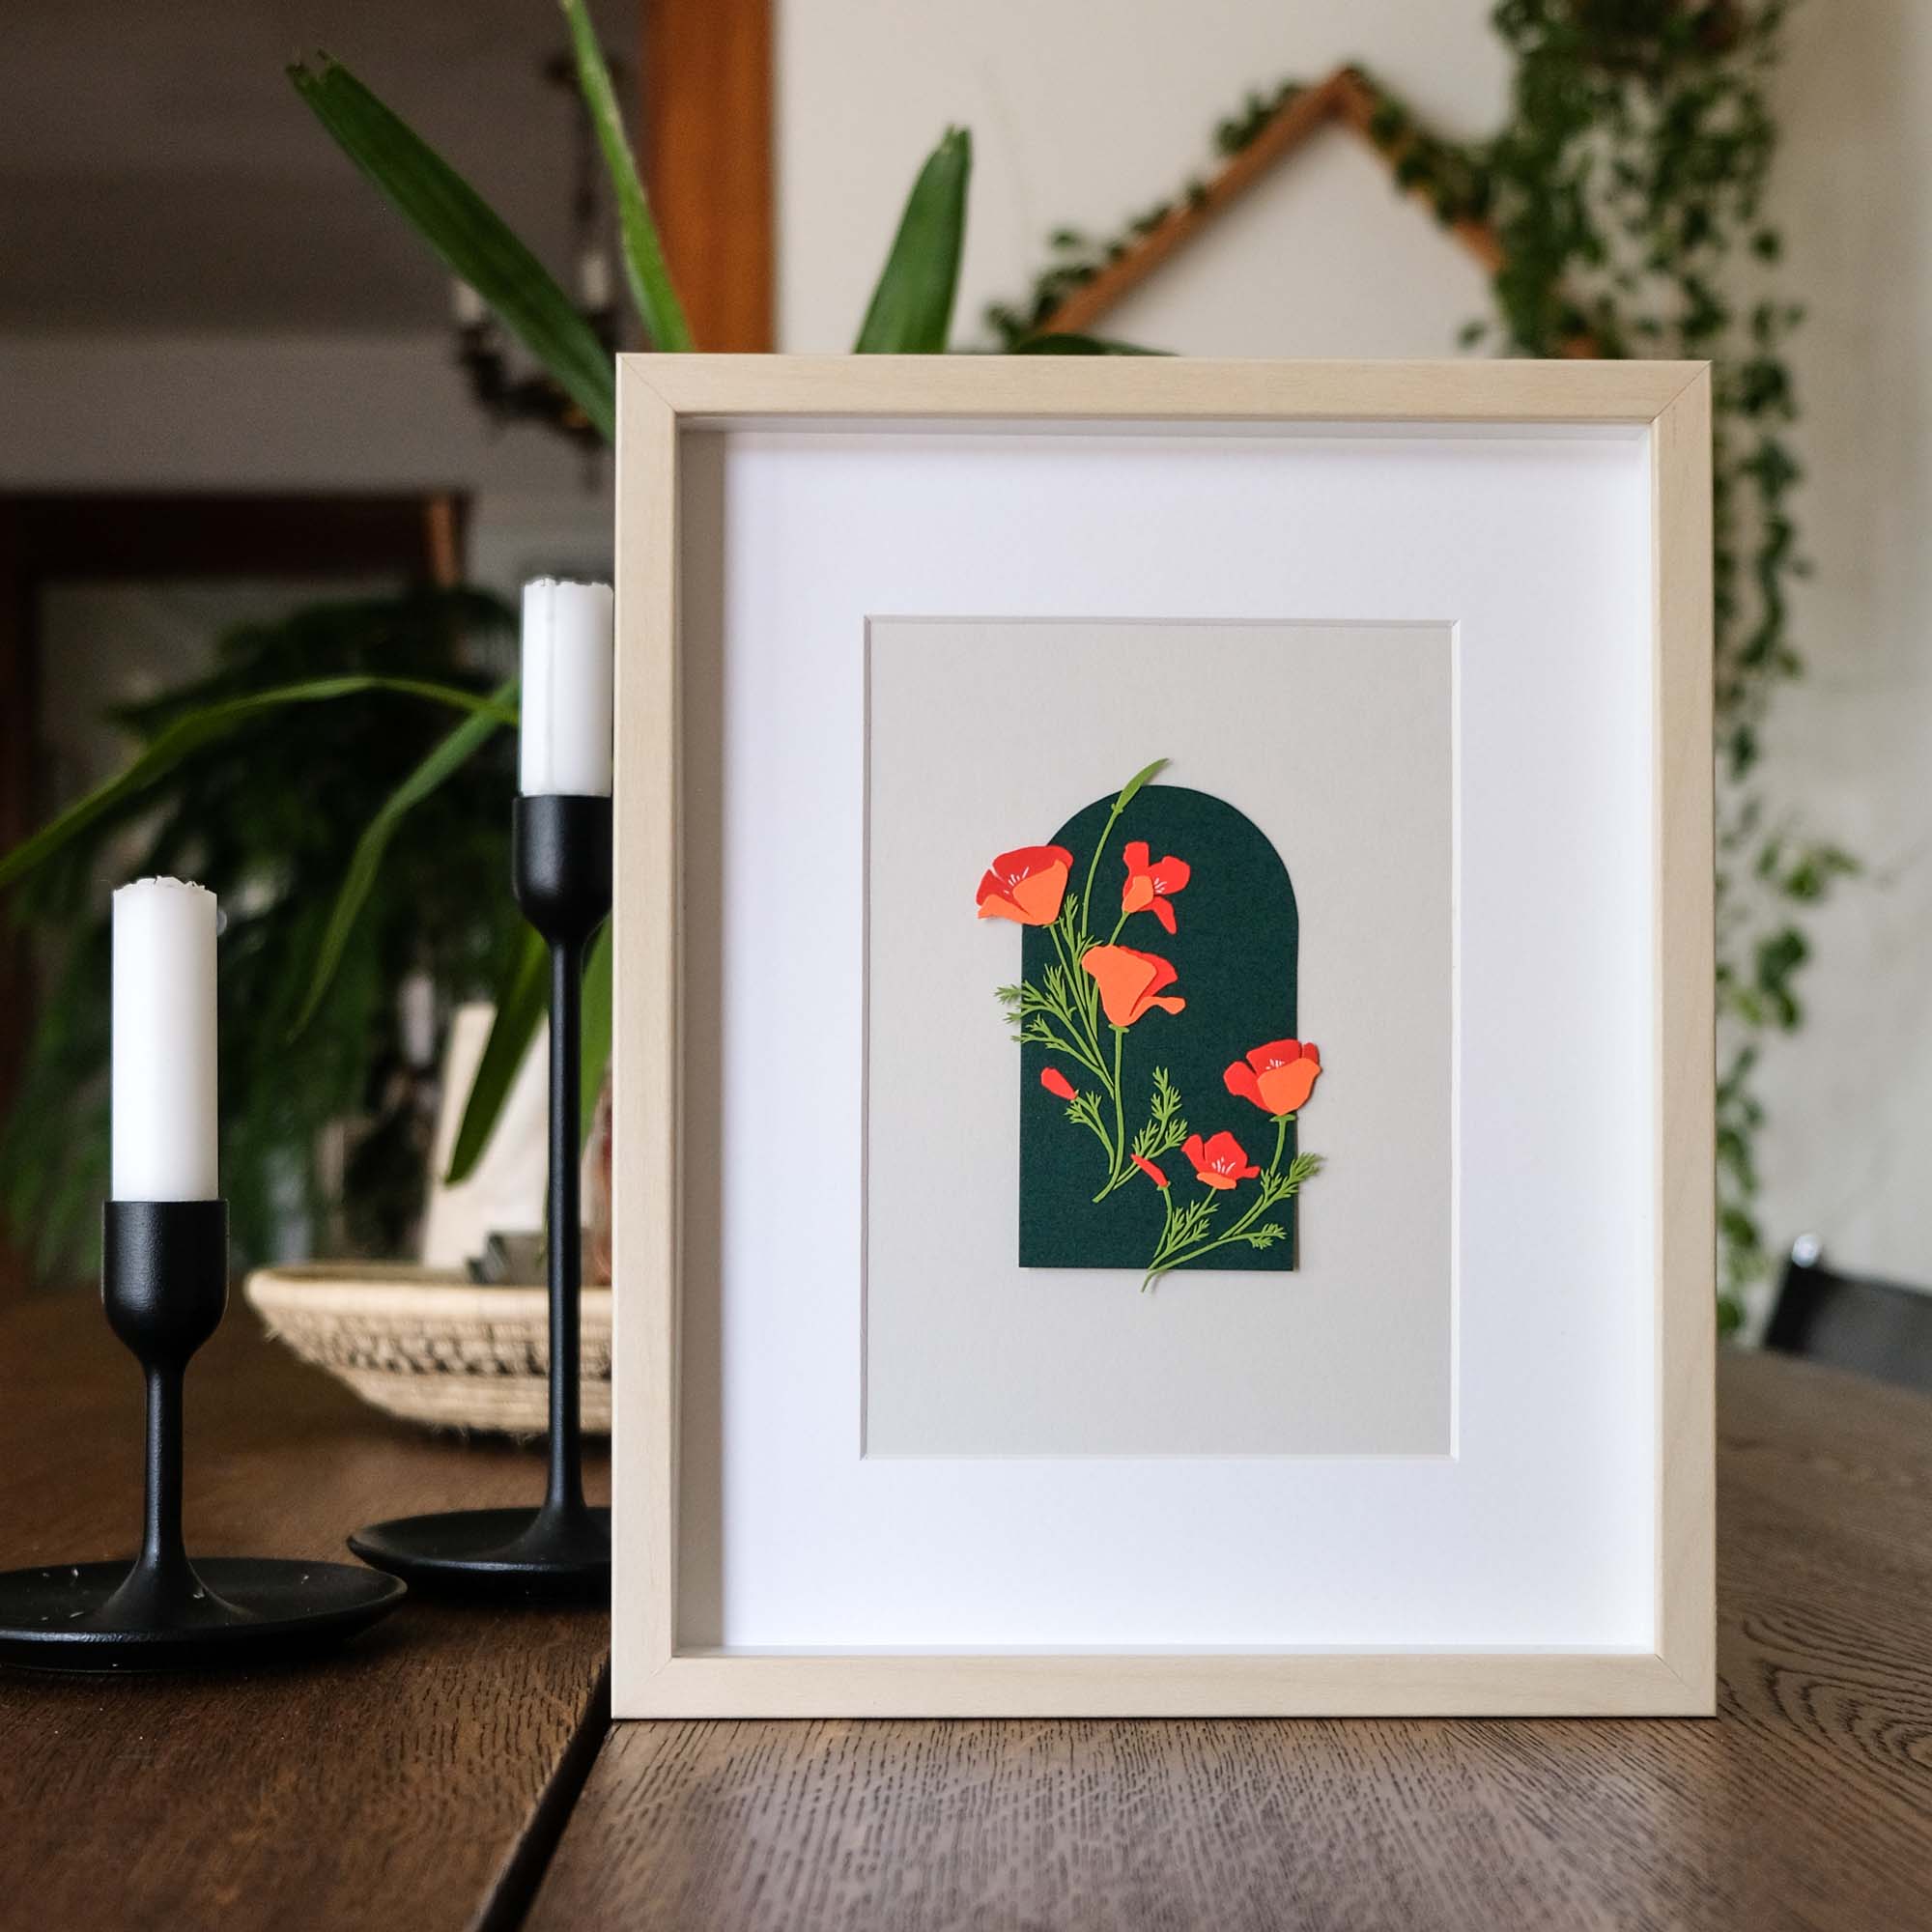 A framed copy of paper California poppies sits on a wood table with houseplants in the background.